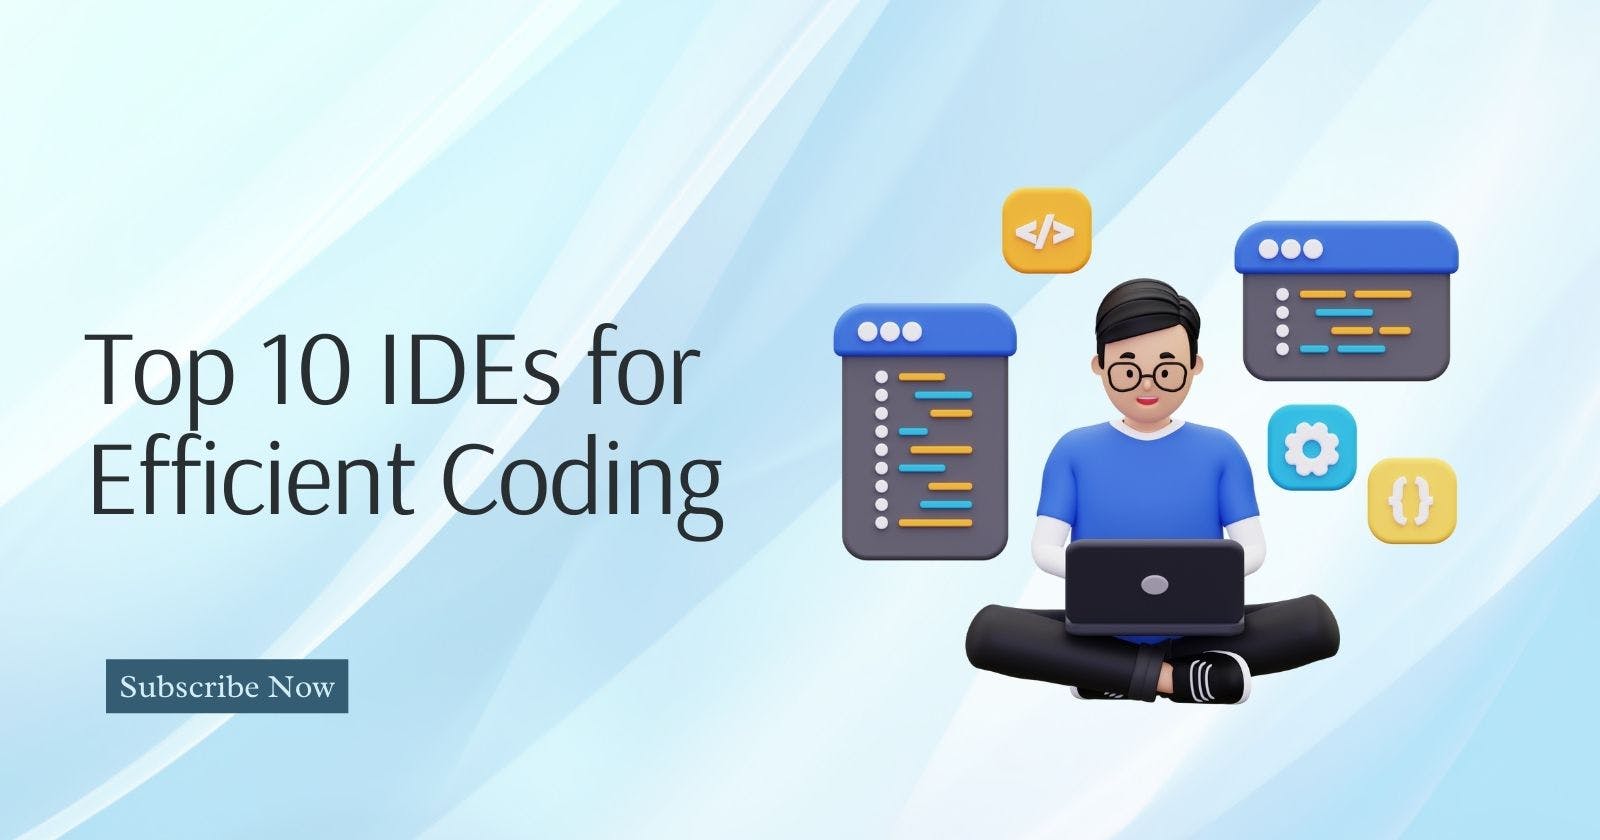 Top 10 Integrated Development Environments (IDEs) for Efficient Coding